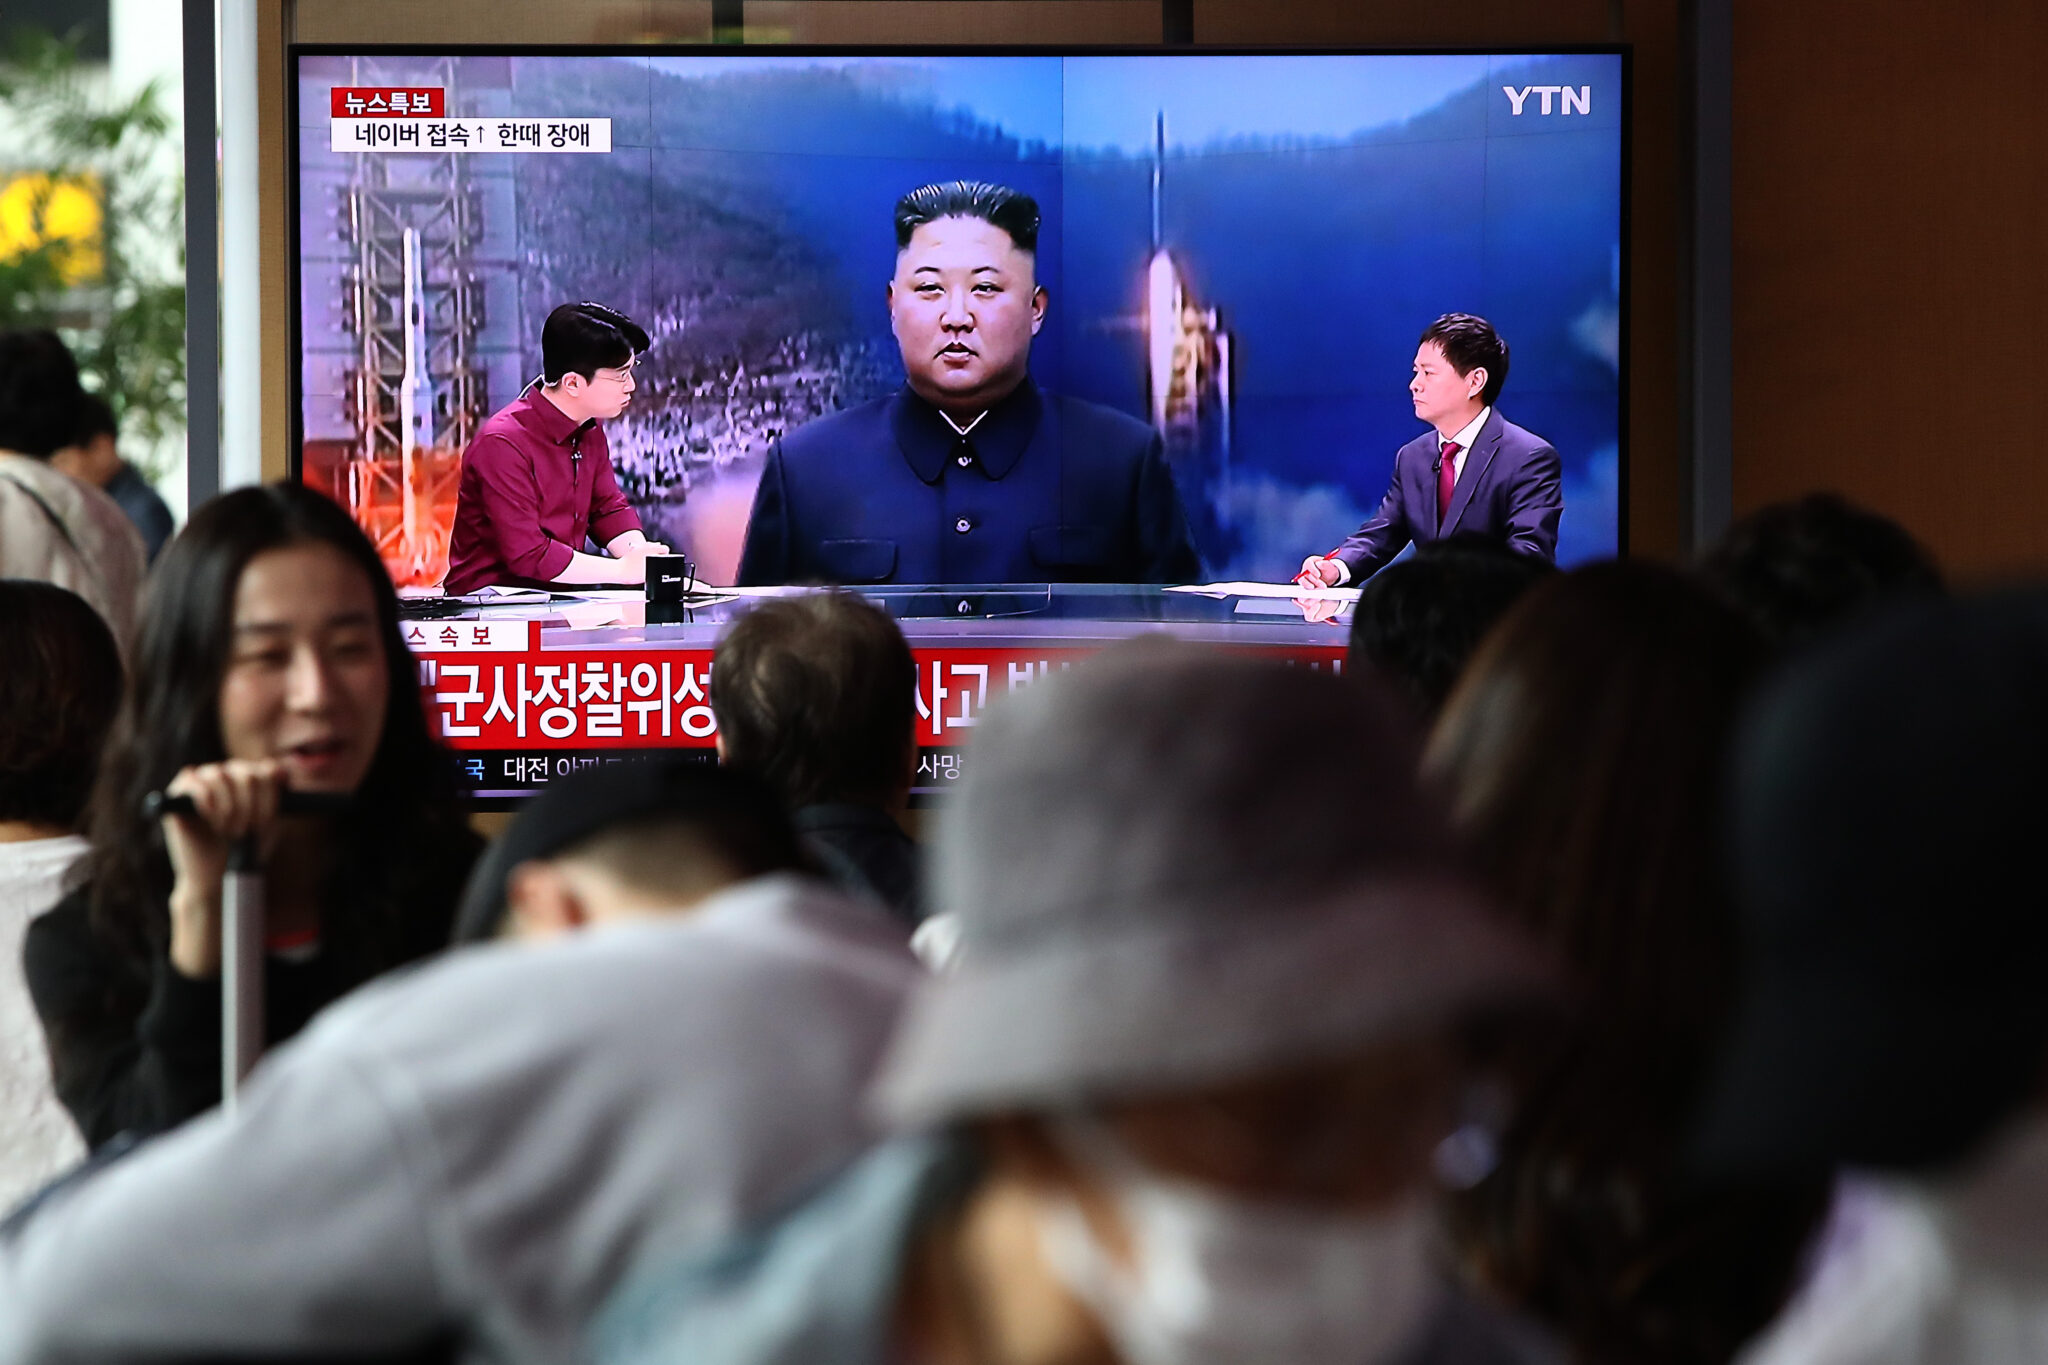 A Nuclear North Korea Presents Opportunity for Global Leadership in a Complicated World